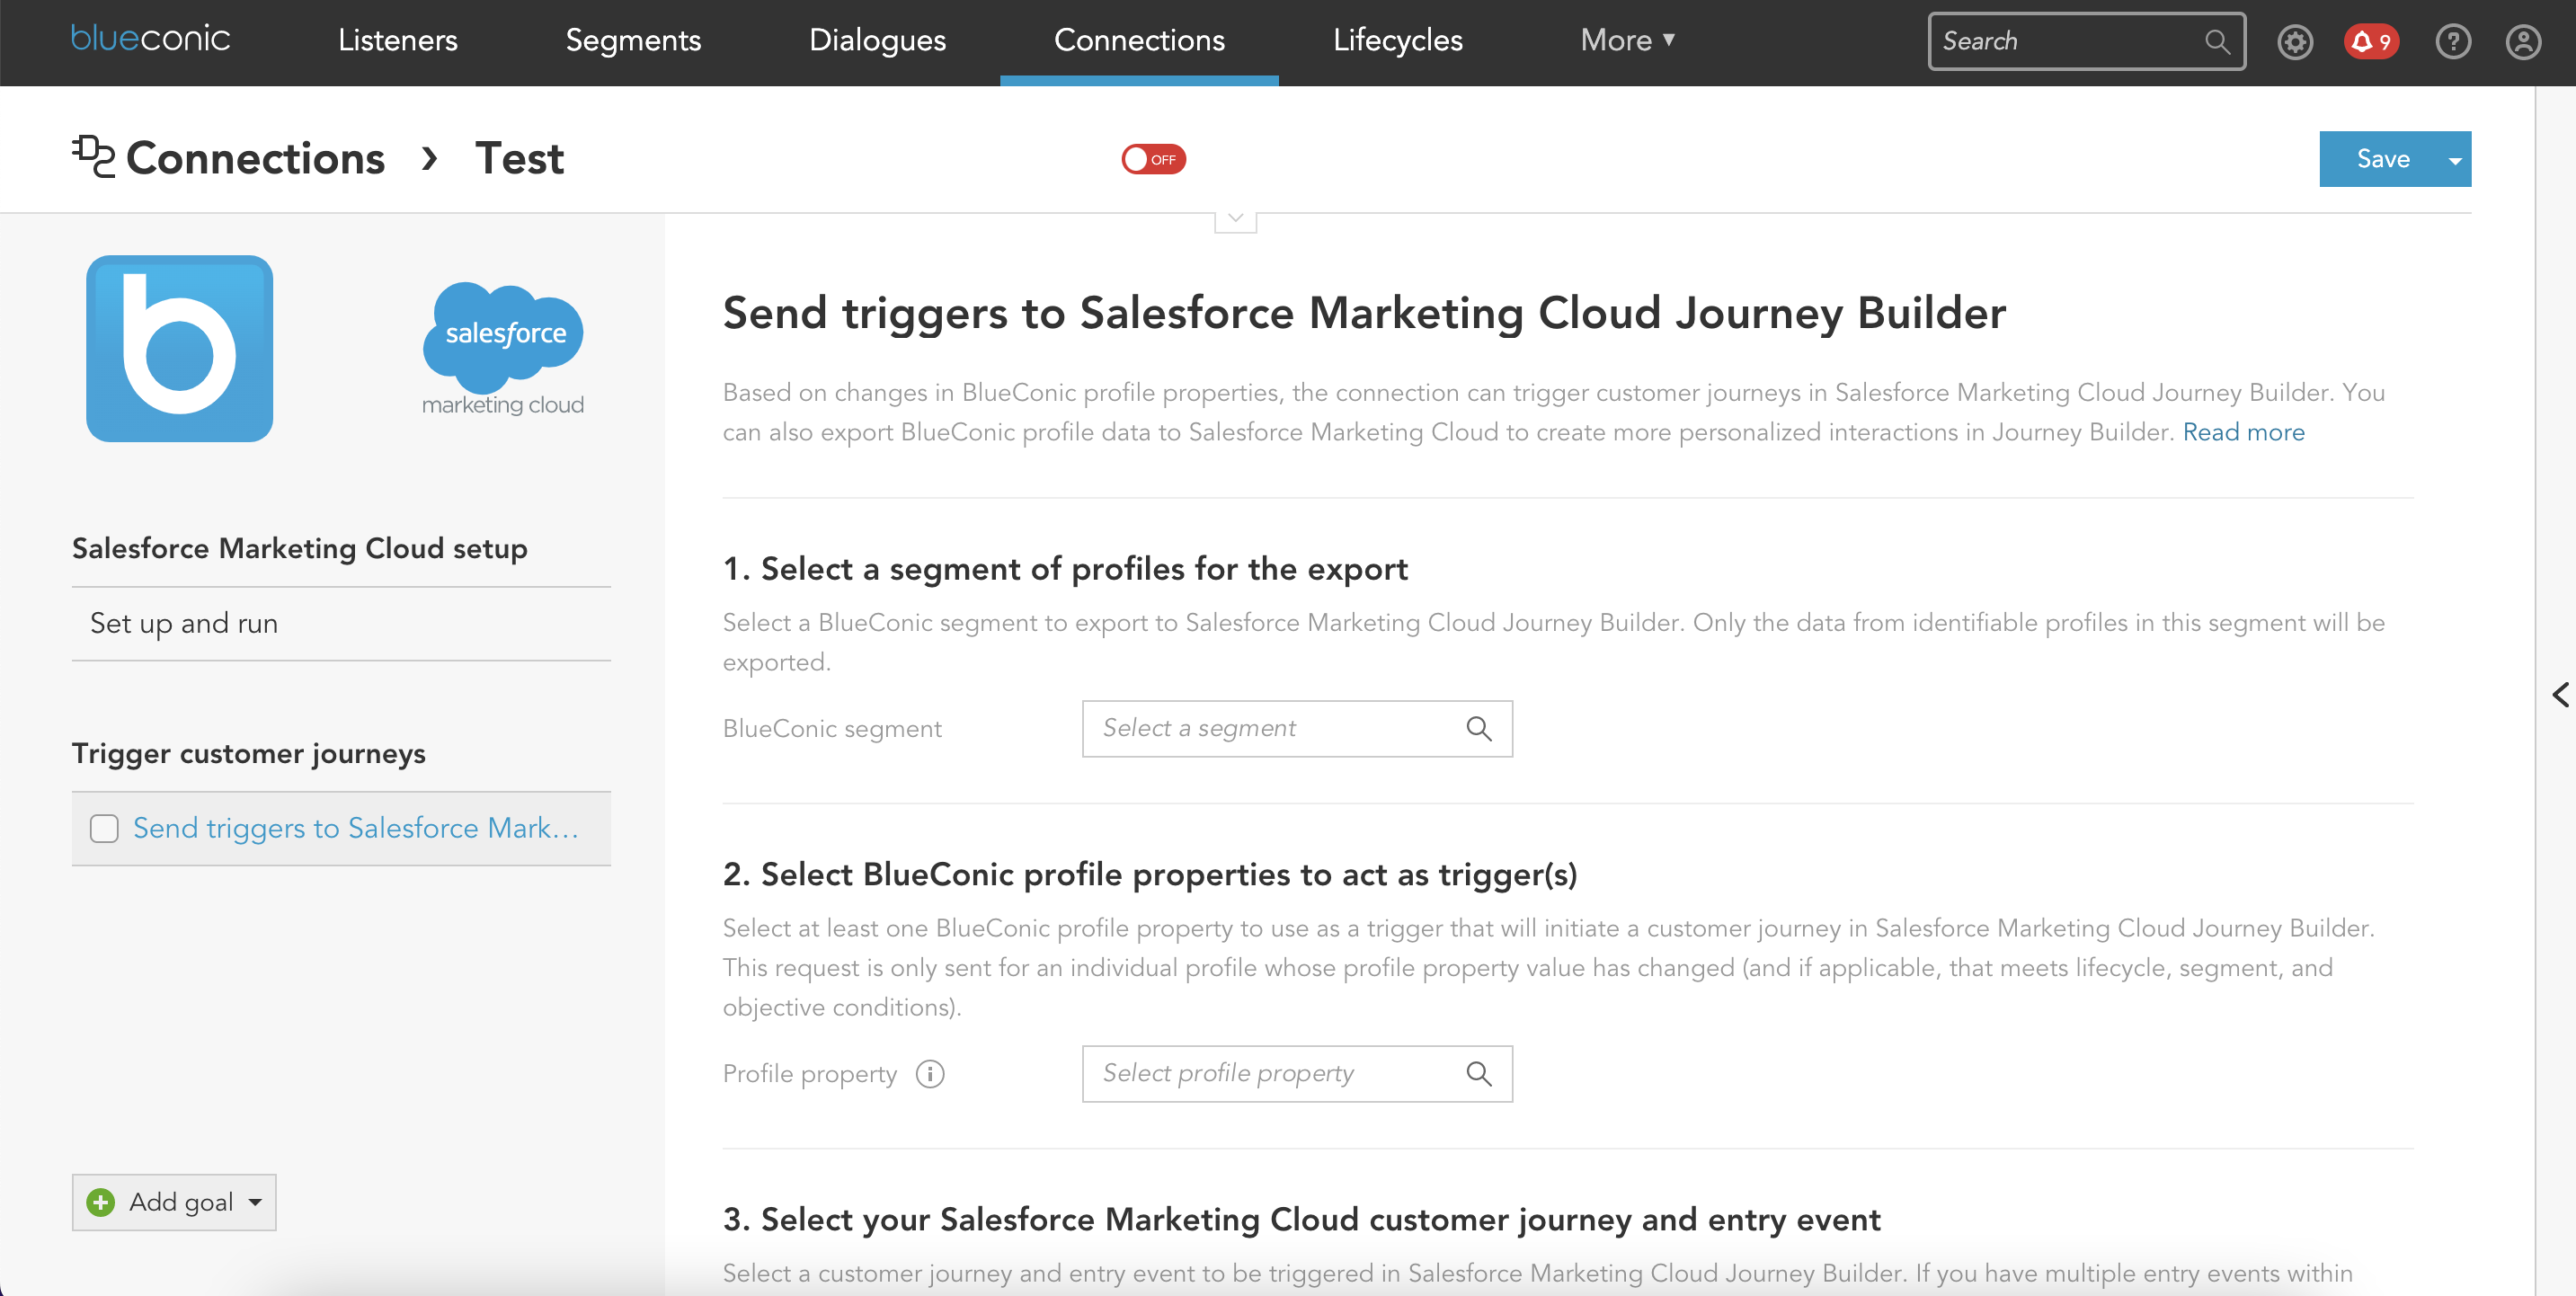 Connecting Salesforce Marketing Cloud SFMC Journey Builder to the customer data in BlueConic CDP